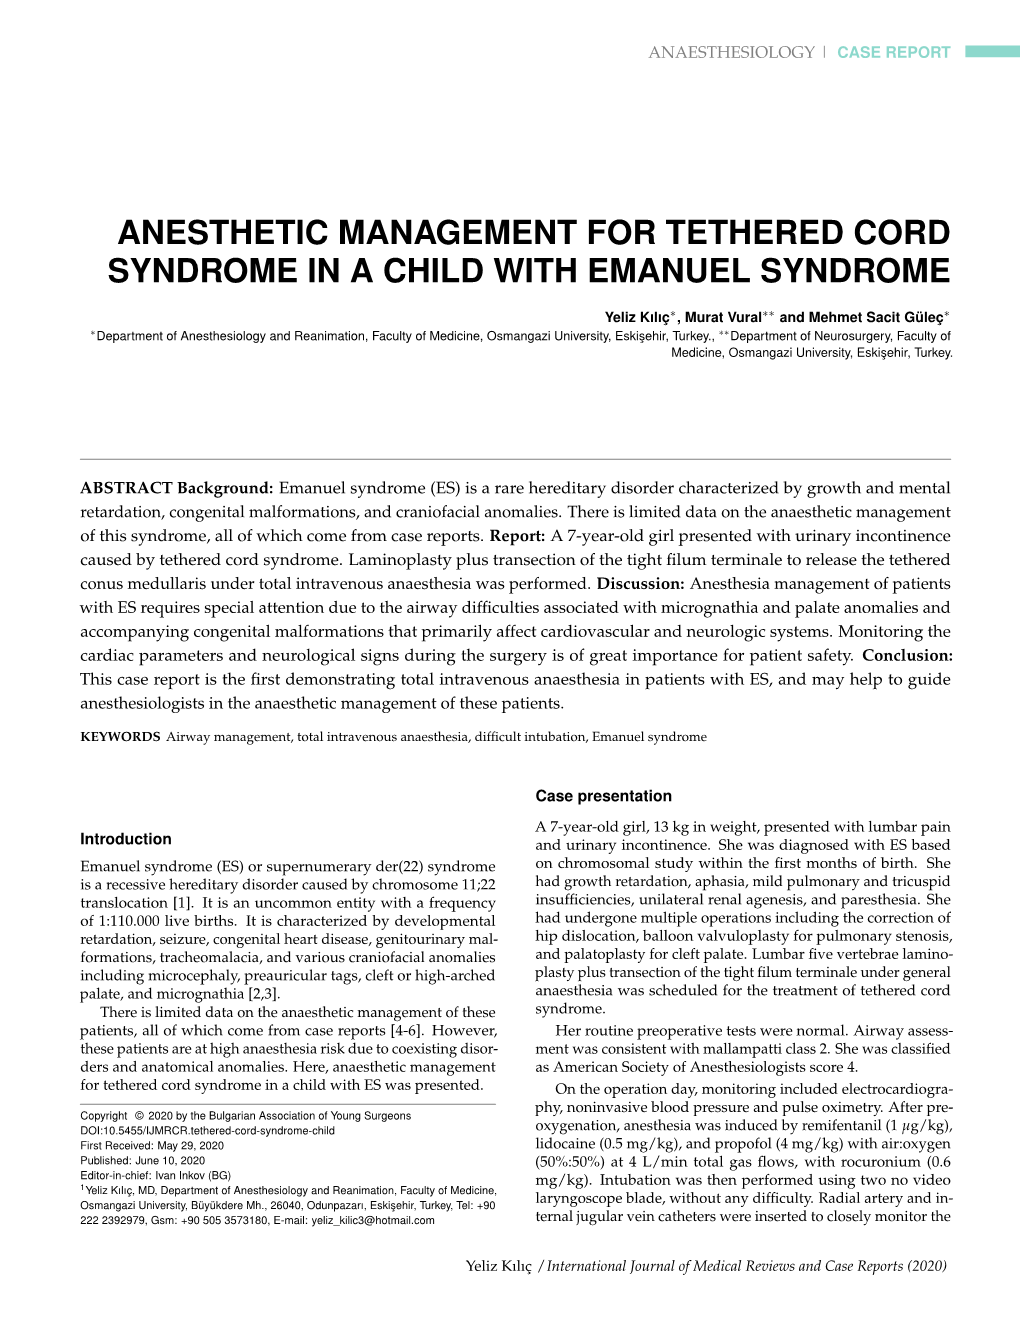 Anesthetic Management for Tethered Cord Syndrome in a Child with Emanuel Syndrome